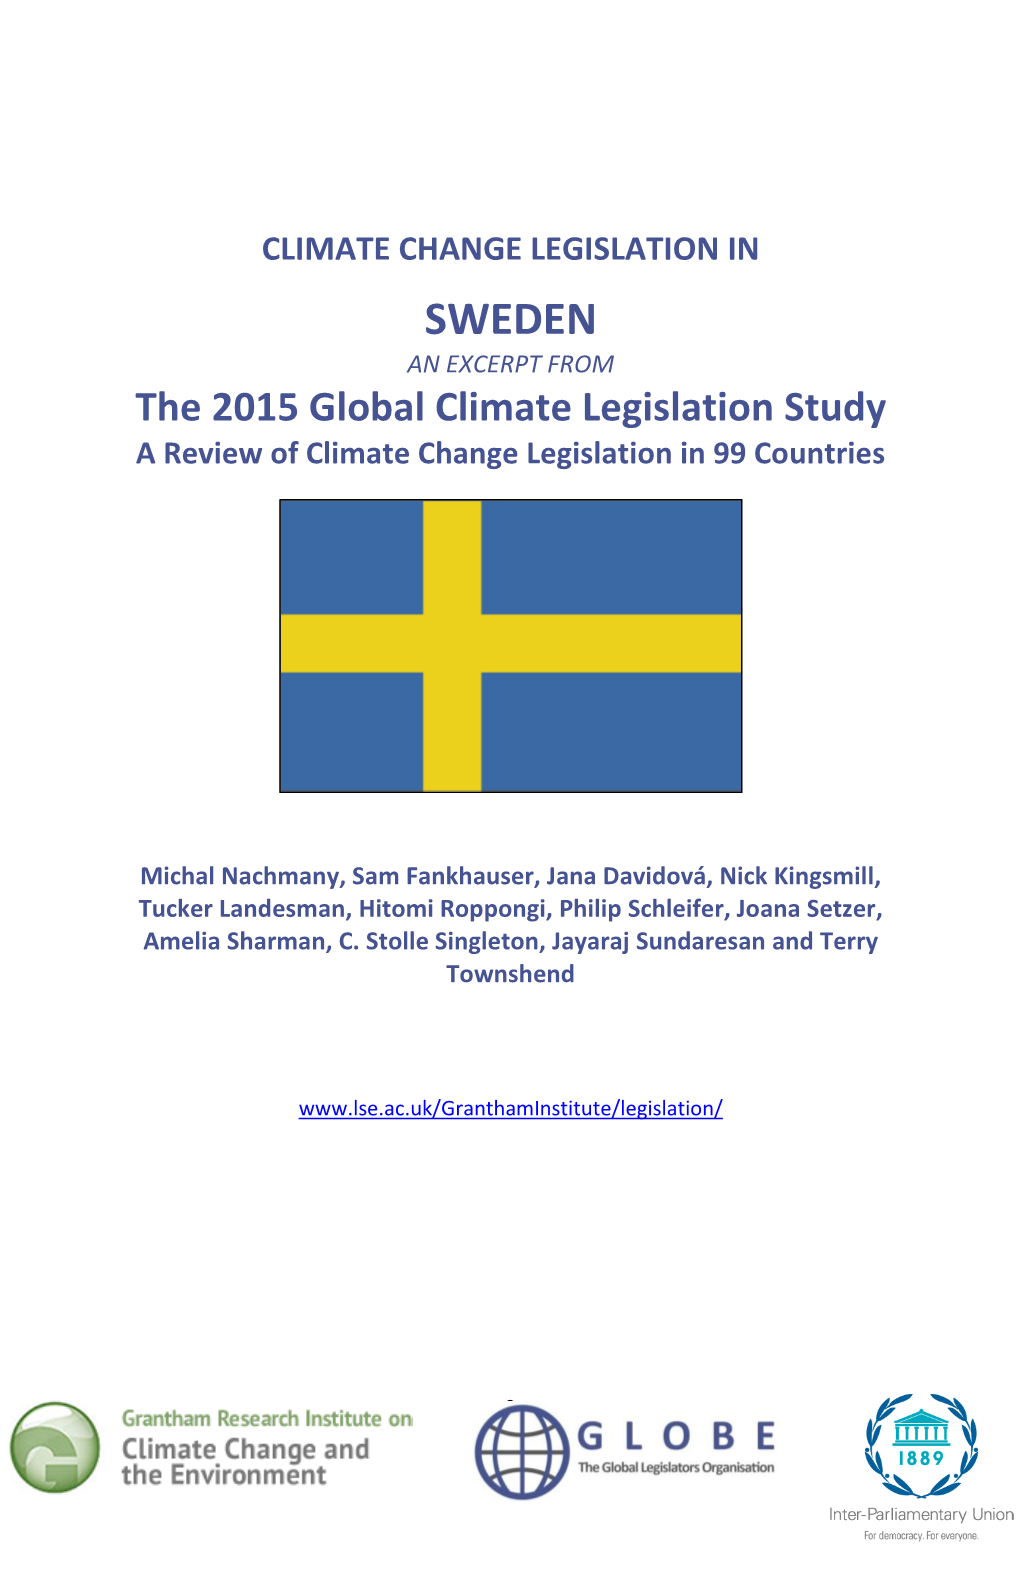 SWEDEN an EXCERPT from the 2015 Global Climate Legislation Study a Review of Climate Change Legislation in 99 Countries